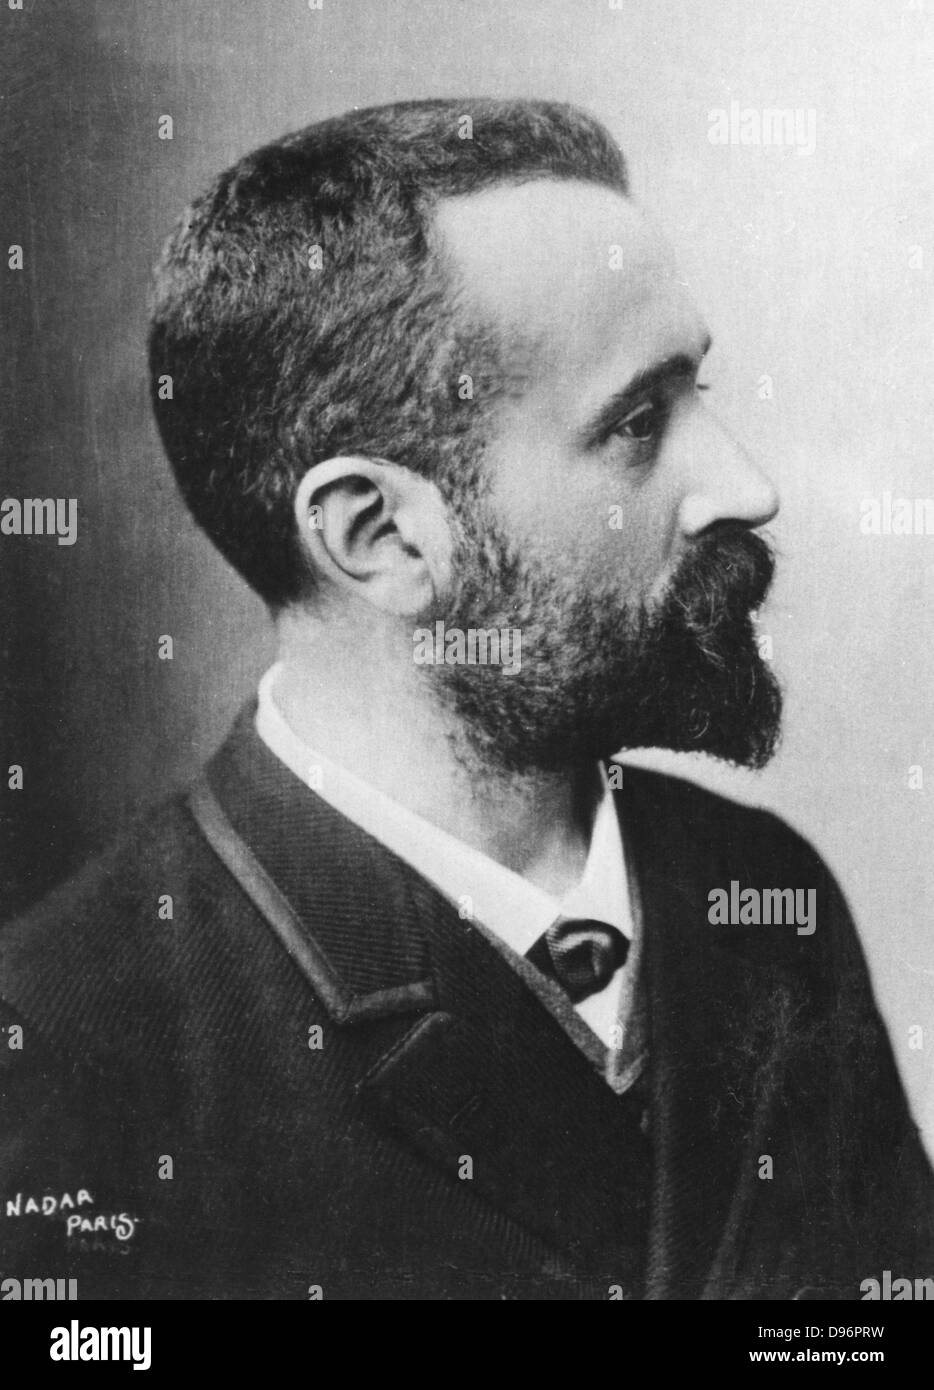 Alphonse Bertillon (1853-1914) French police officer.  In 1880, when Chief of the Paris identification bureau, Bertillon devised a method of identifying criminals using anthropometric measurements.  It was used for a number of years, but was replaced by fingerprinting.  Photo by Nadar, Paris, c1880. Nadar was the pseudonym of Gaspard-Felix Tournachon (1820-1910), French journalist, artist and photographer. Stock Photo